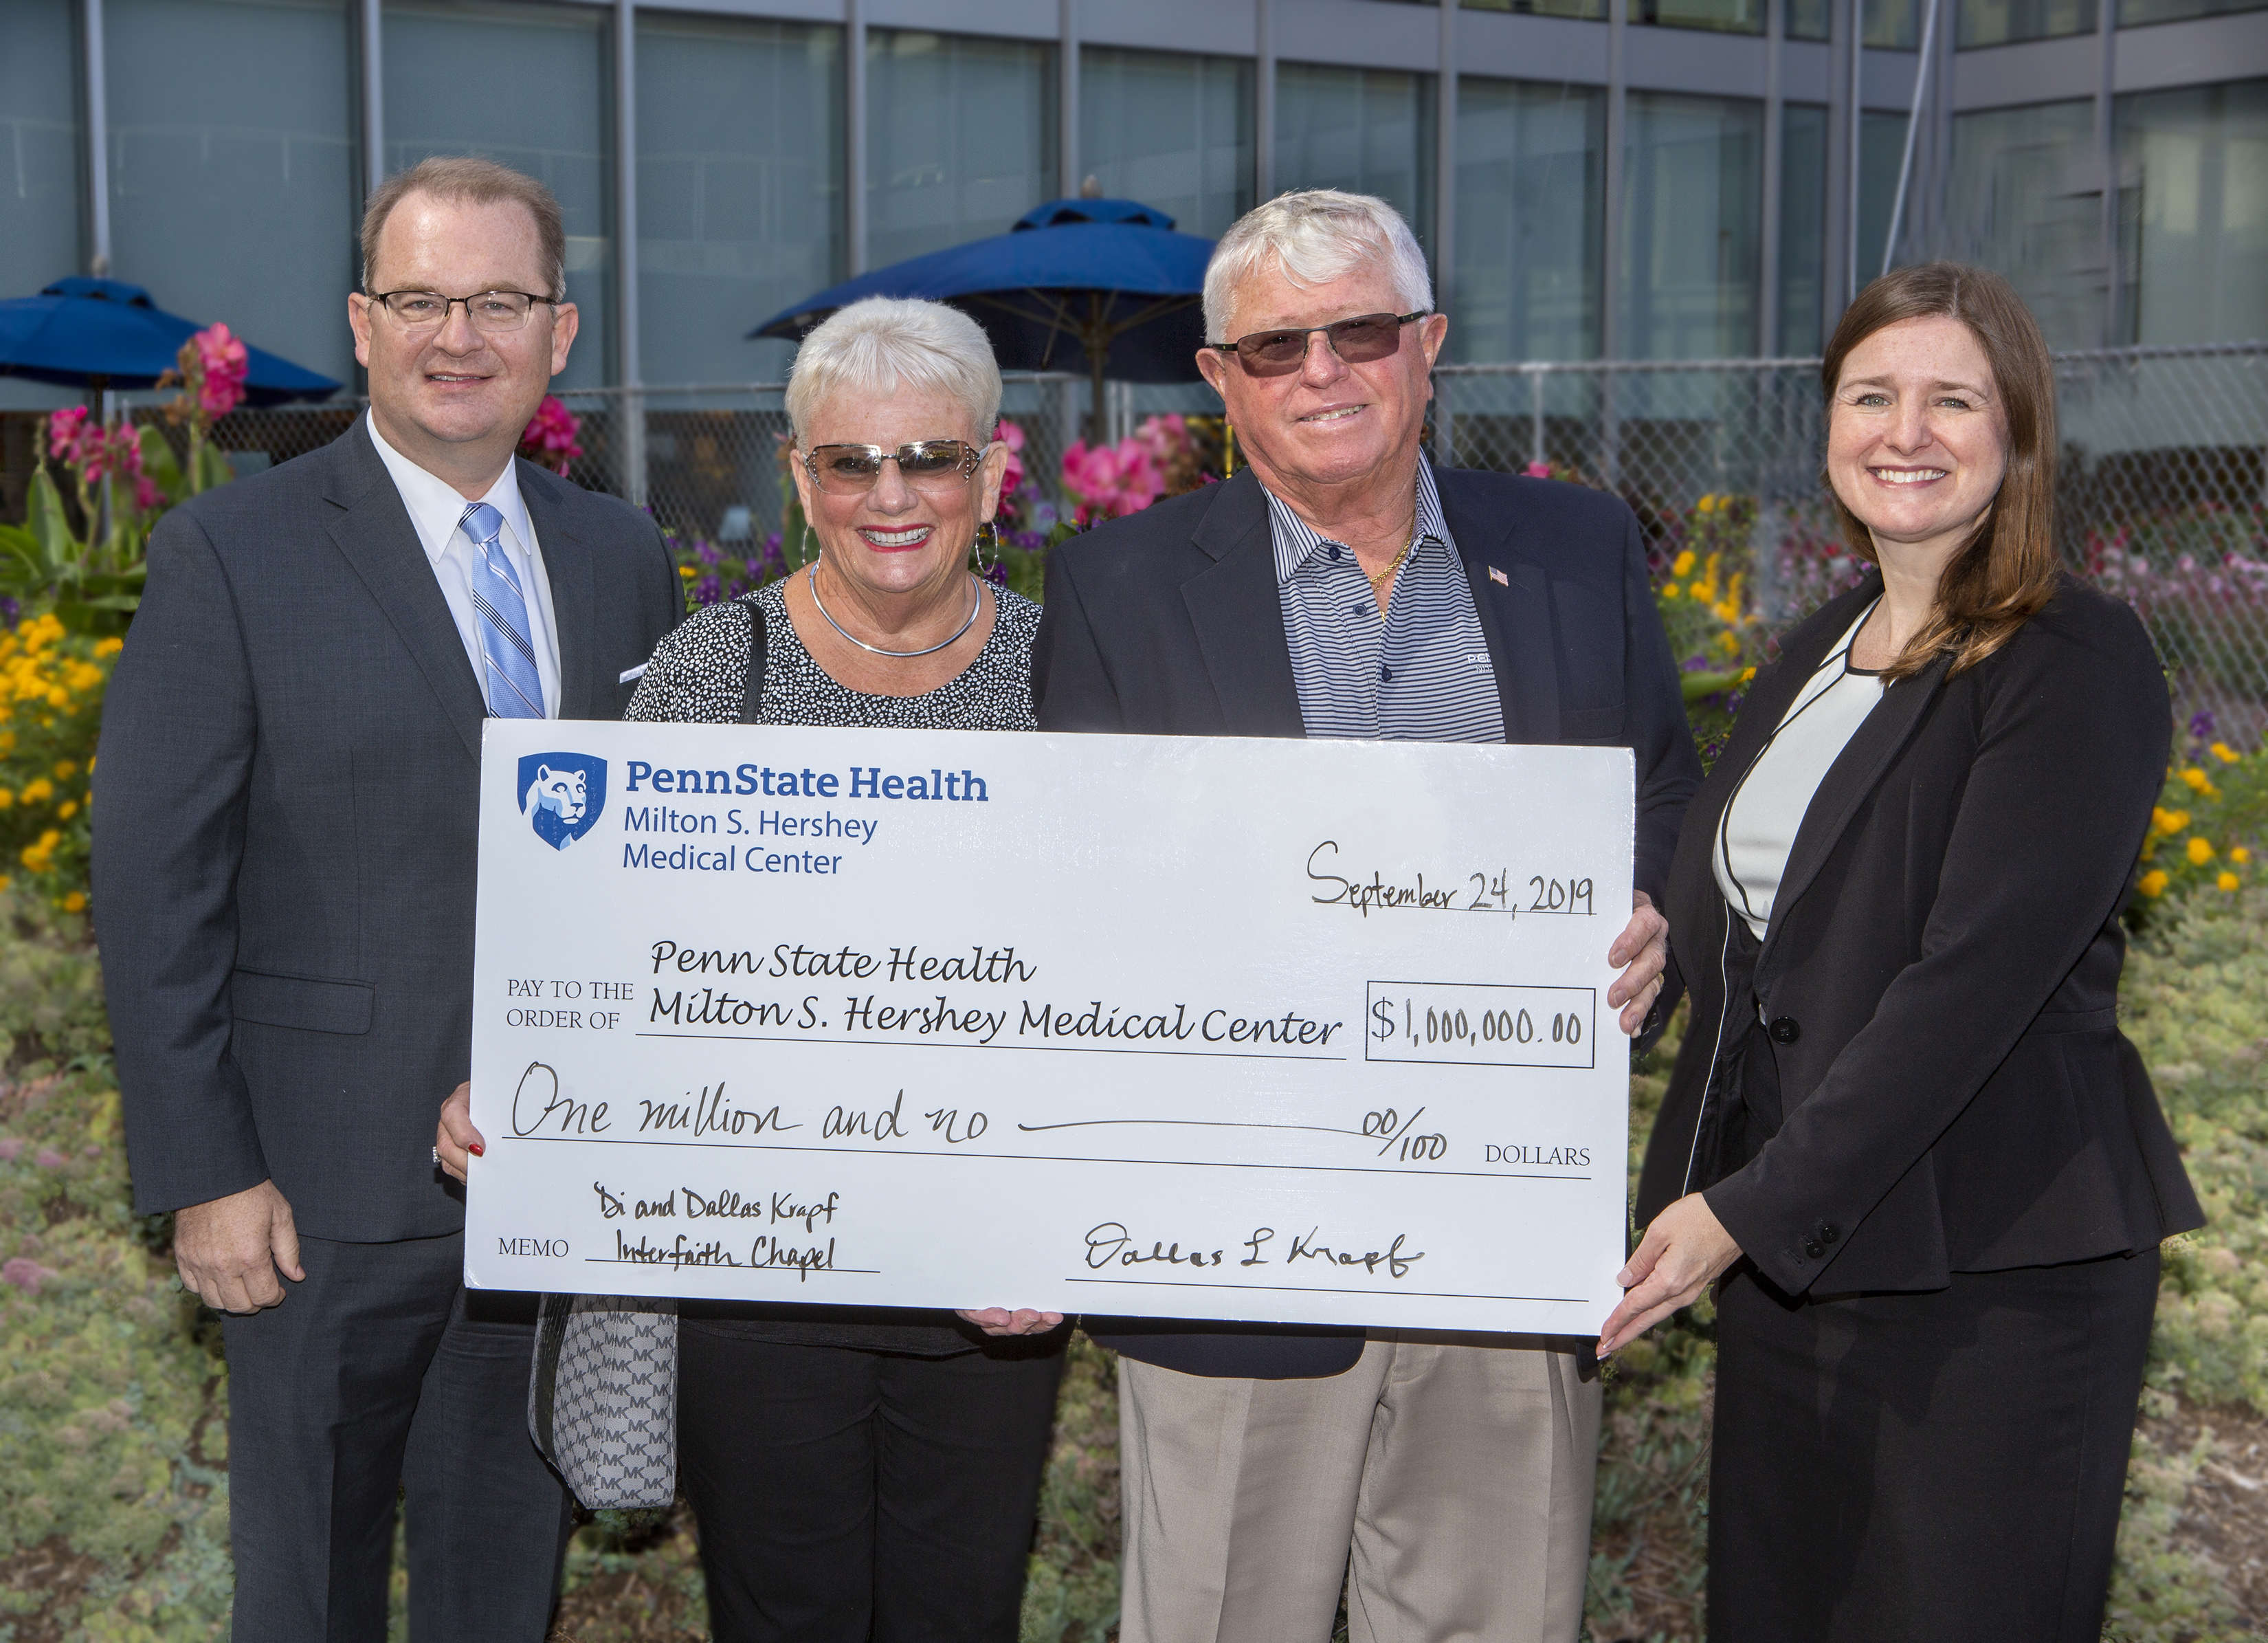 Four people – two men and two women – pose outside for a photo holding an oversized check made out to Penn State Health Milton S. Hershey Medical Center, in the amount of $1 million. It’s signed by Dallas Krapf. A building with windows is in the background, as are bushes and flowers.